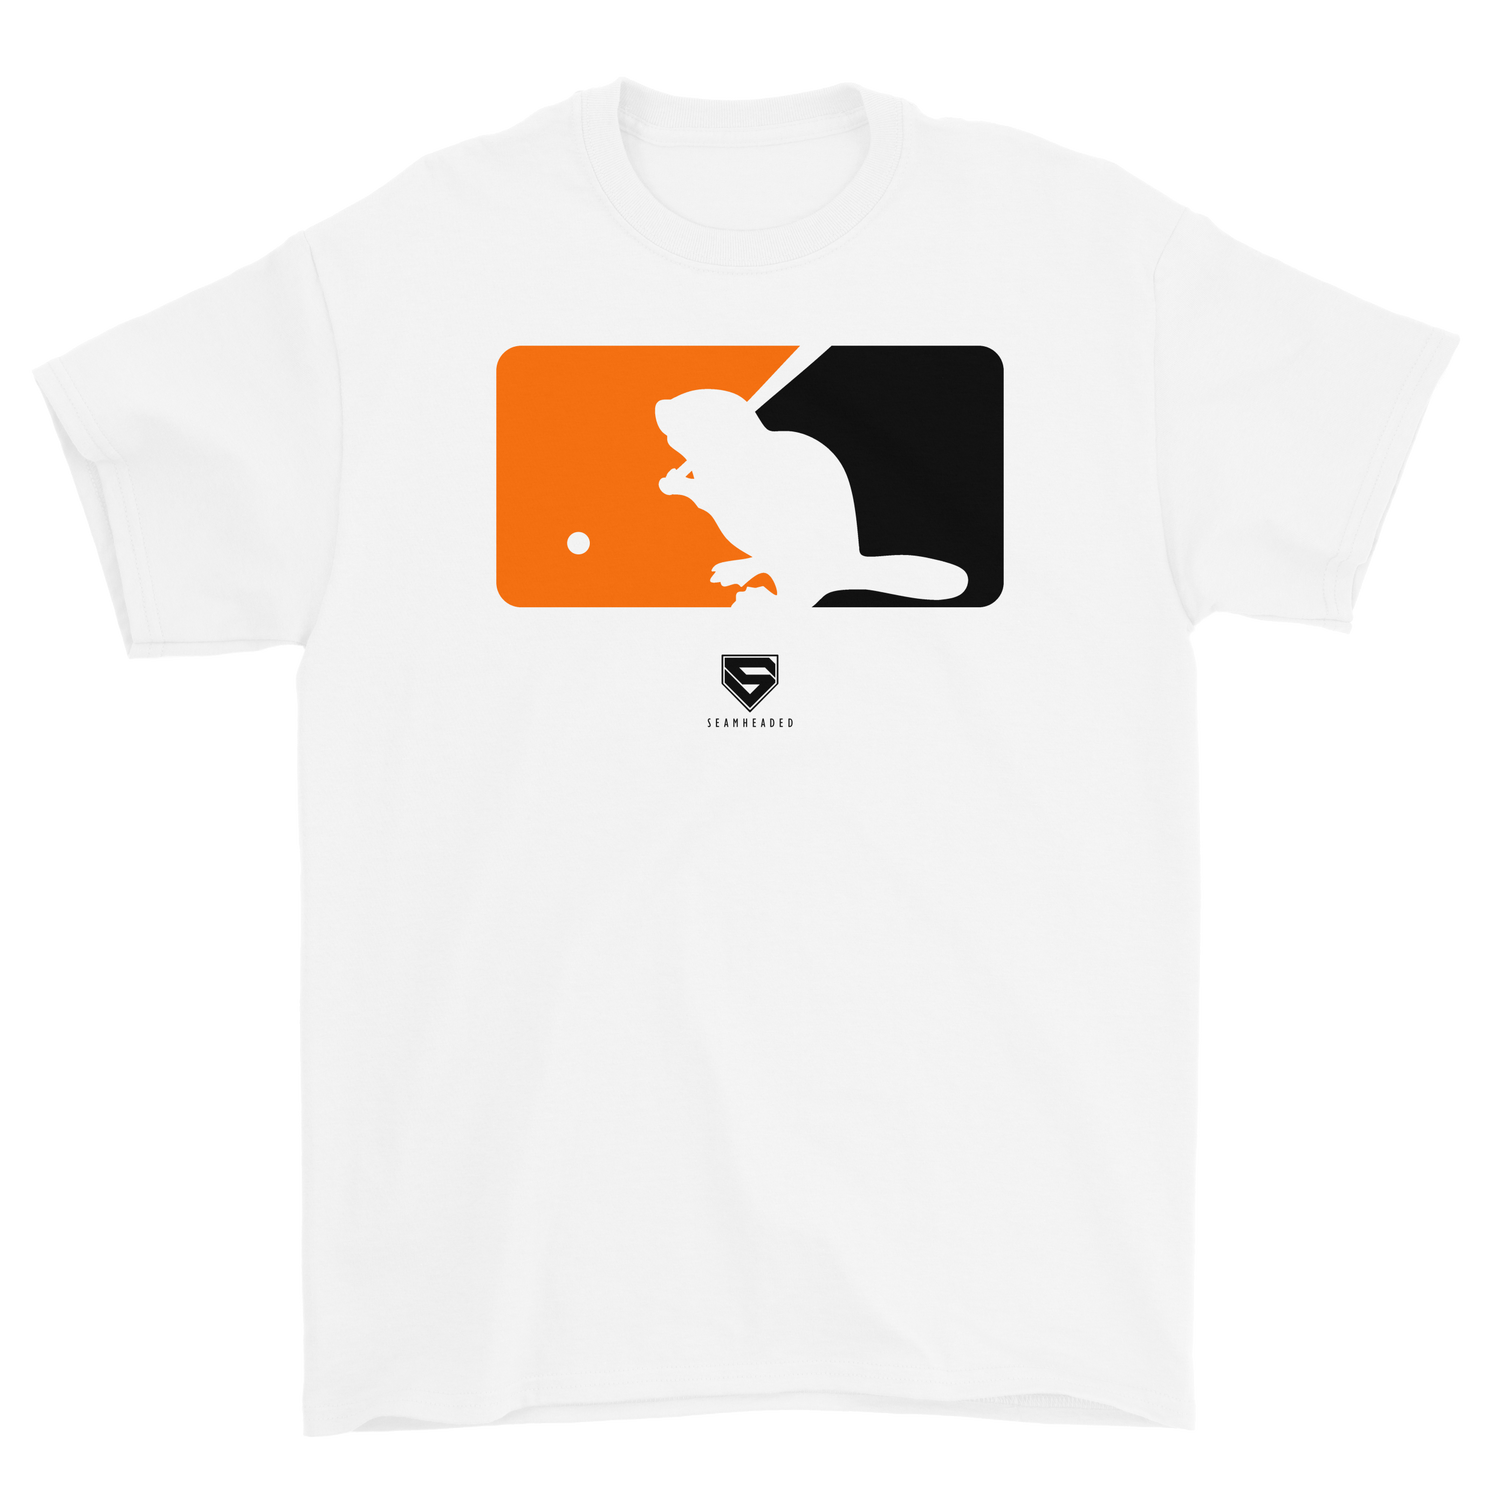 The League Men's Tee from Seamheaded Apparel